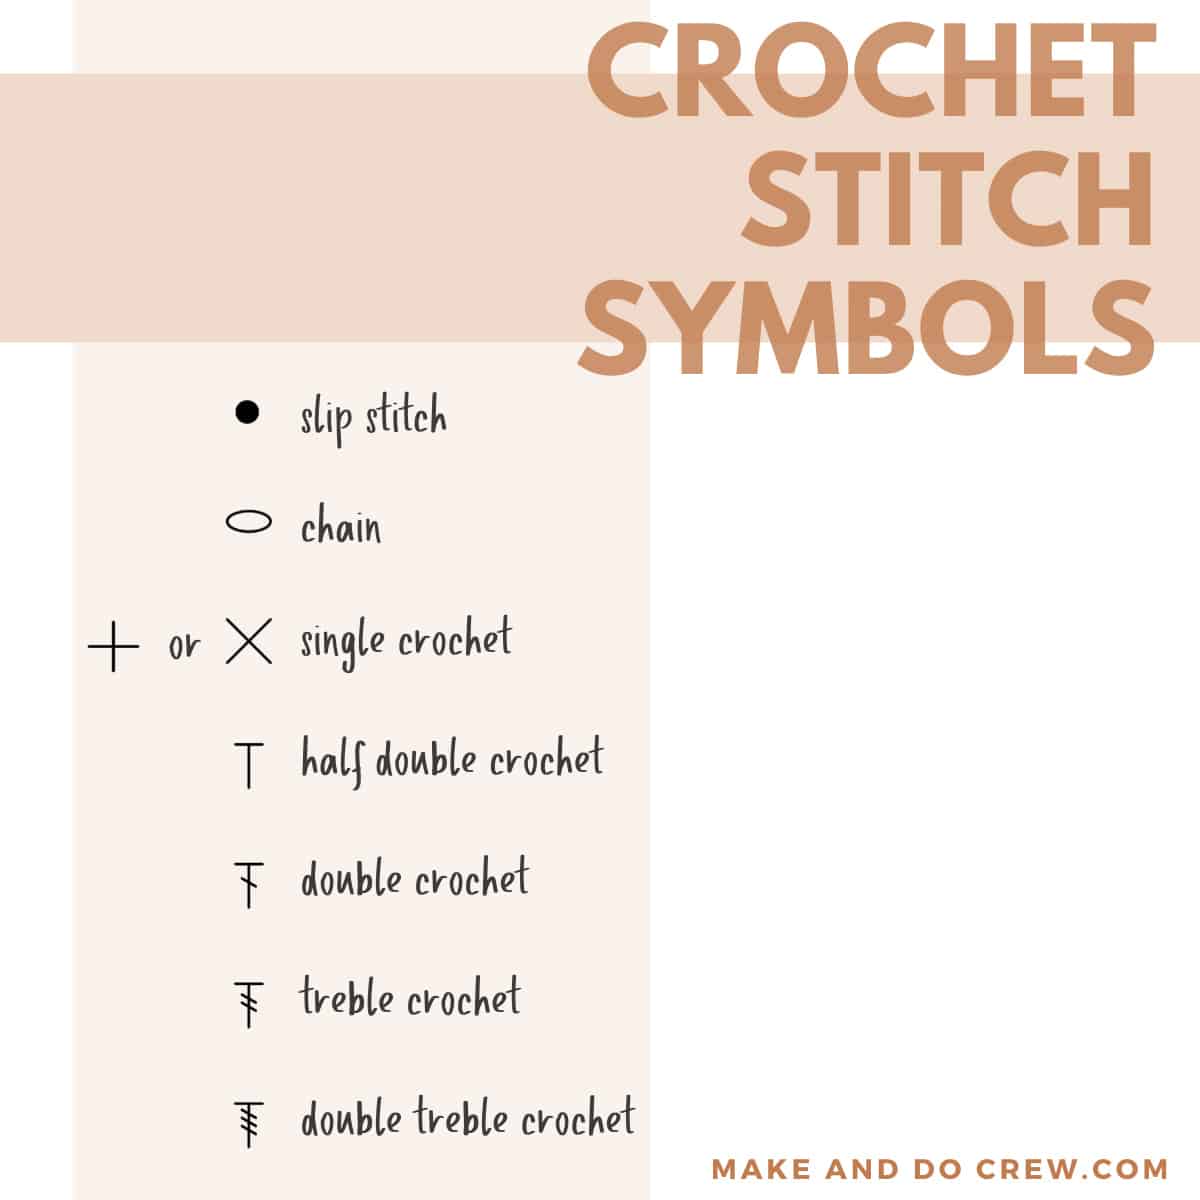 A list of common crochet symbols and the stitches they represent.